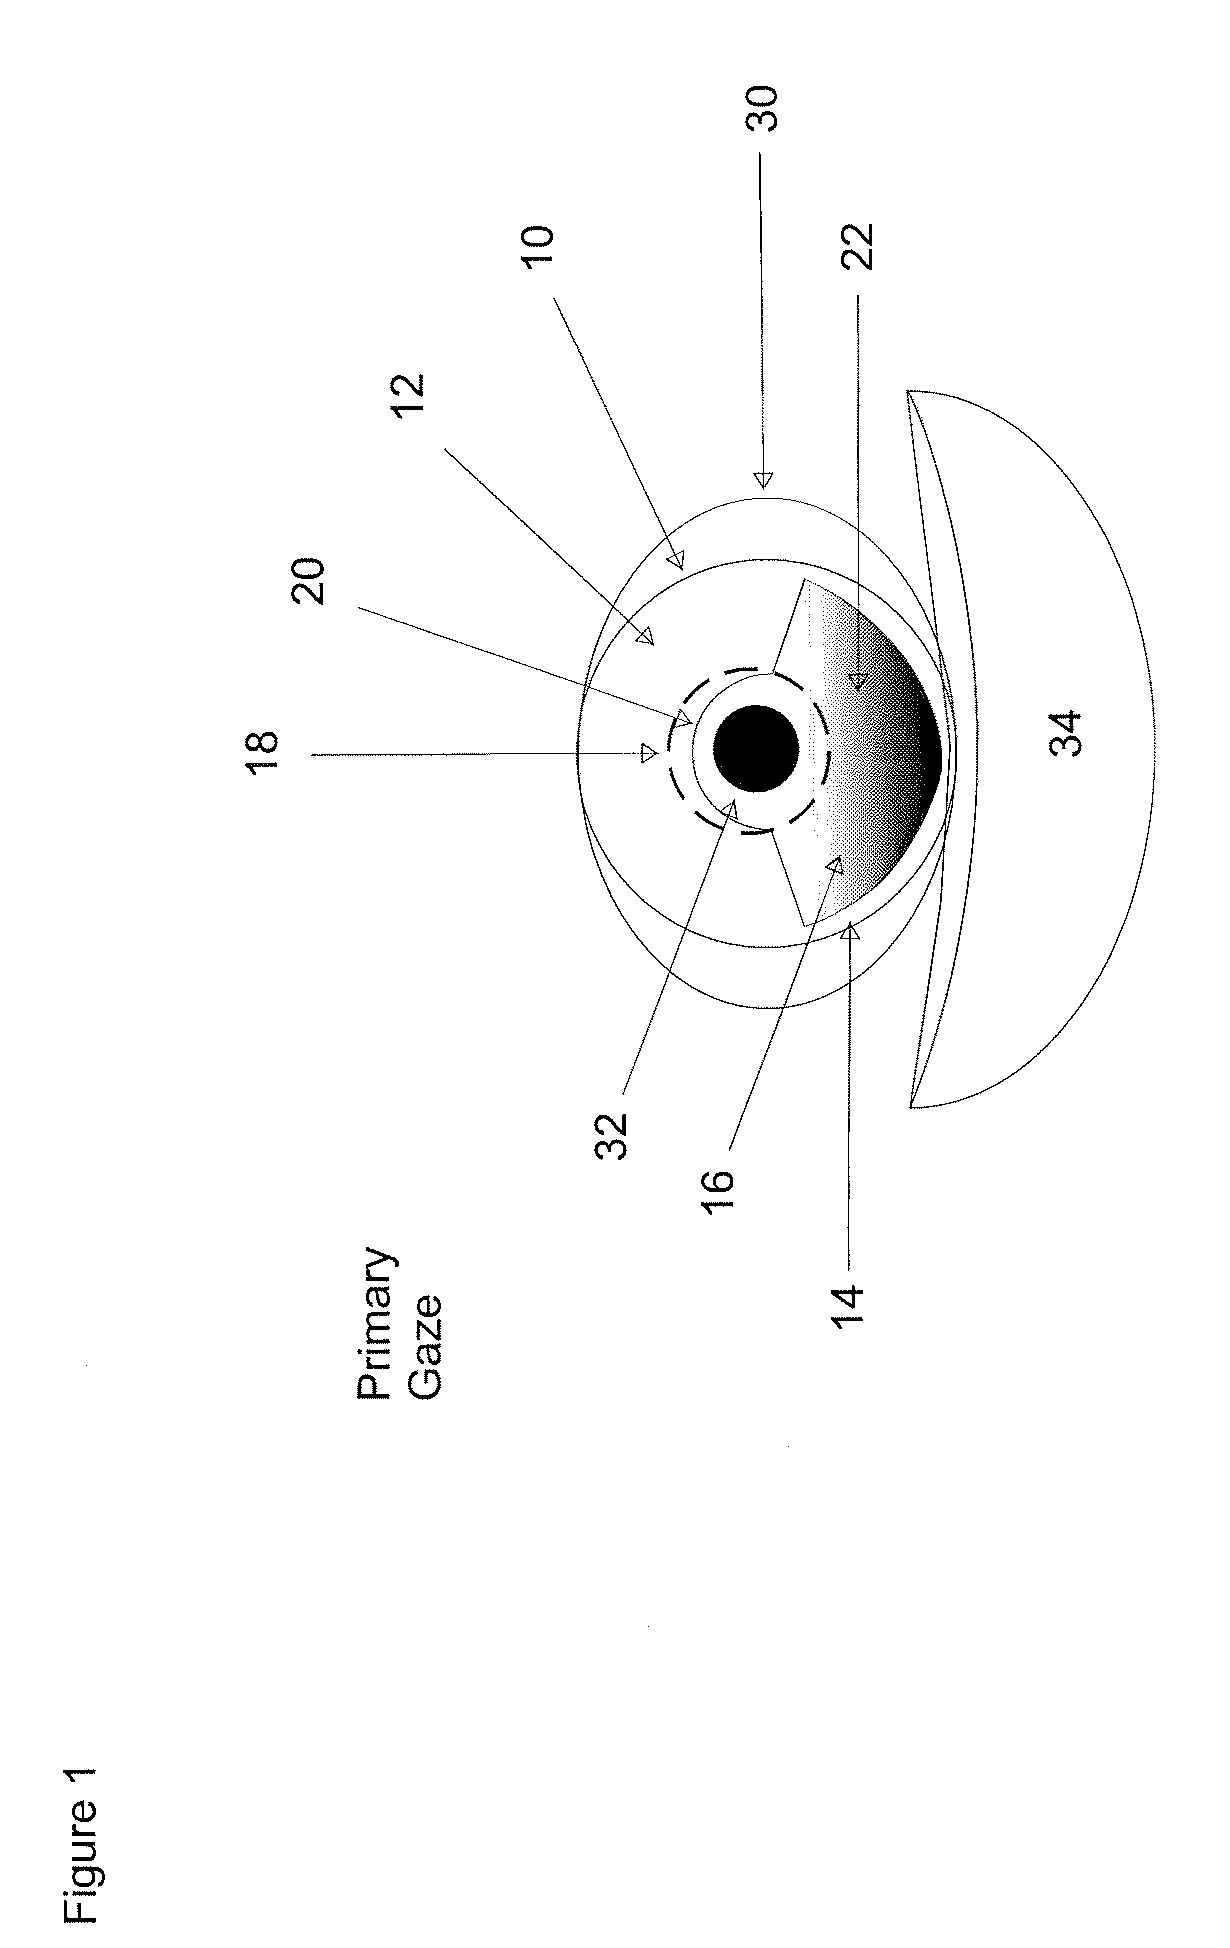 Hydrodynamically operated multifocal contact lens